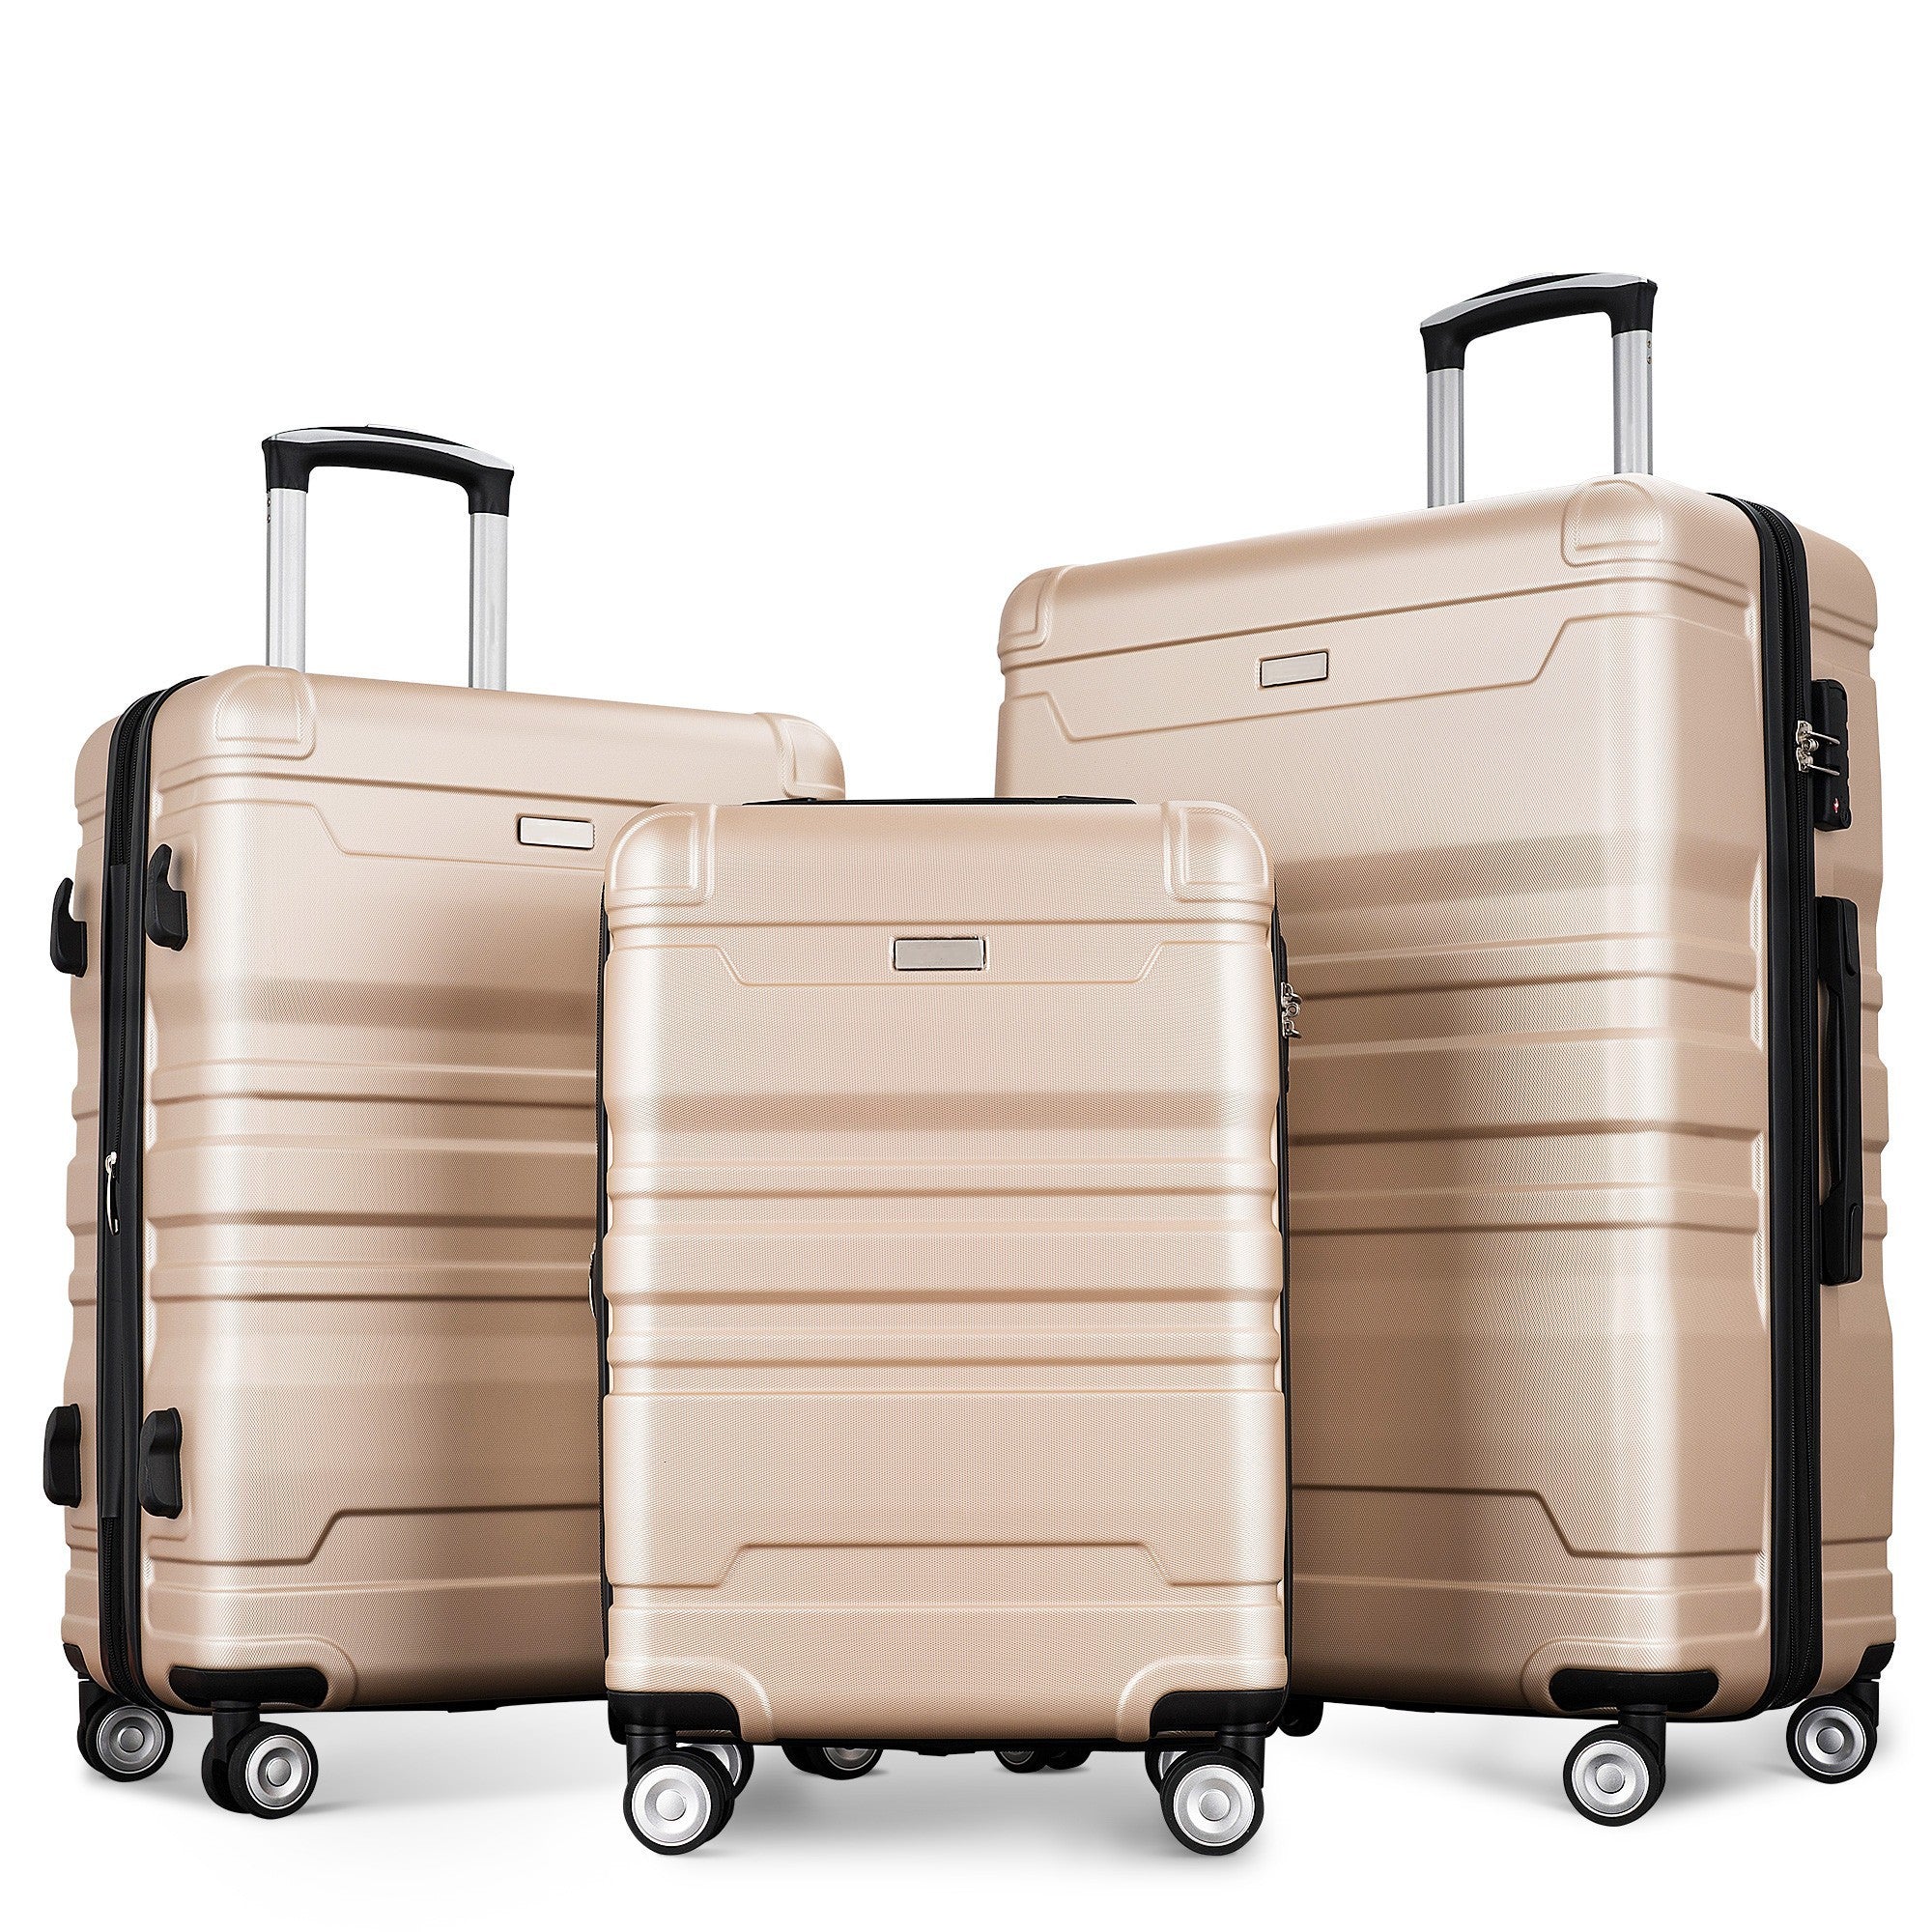 Luggage Sets Model Expandable ABS Hardshell 3pcs champagne-abs